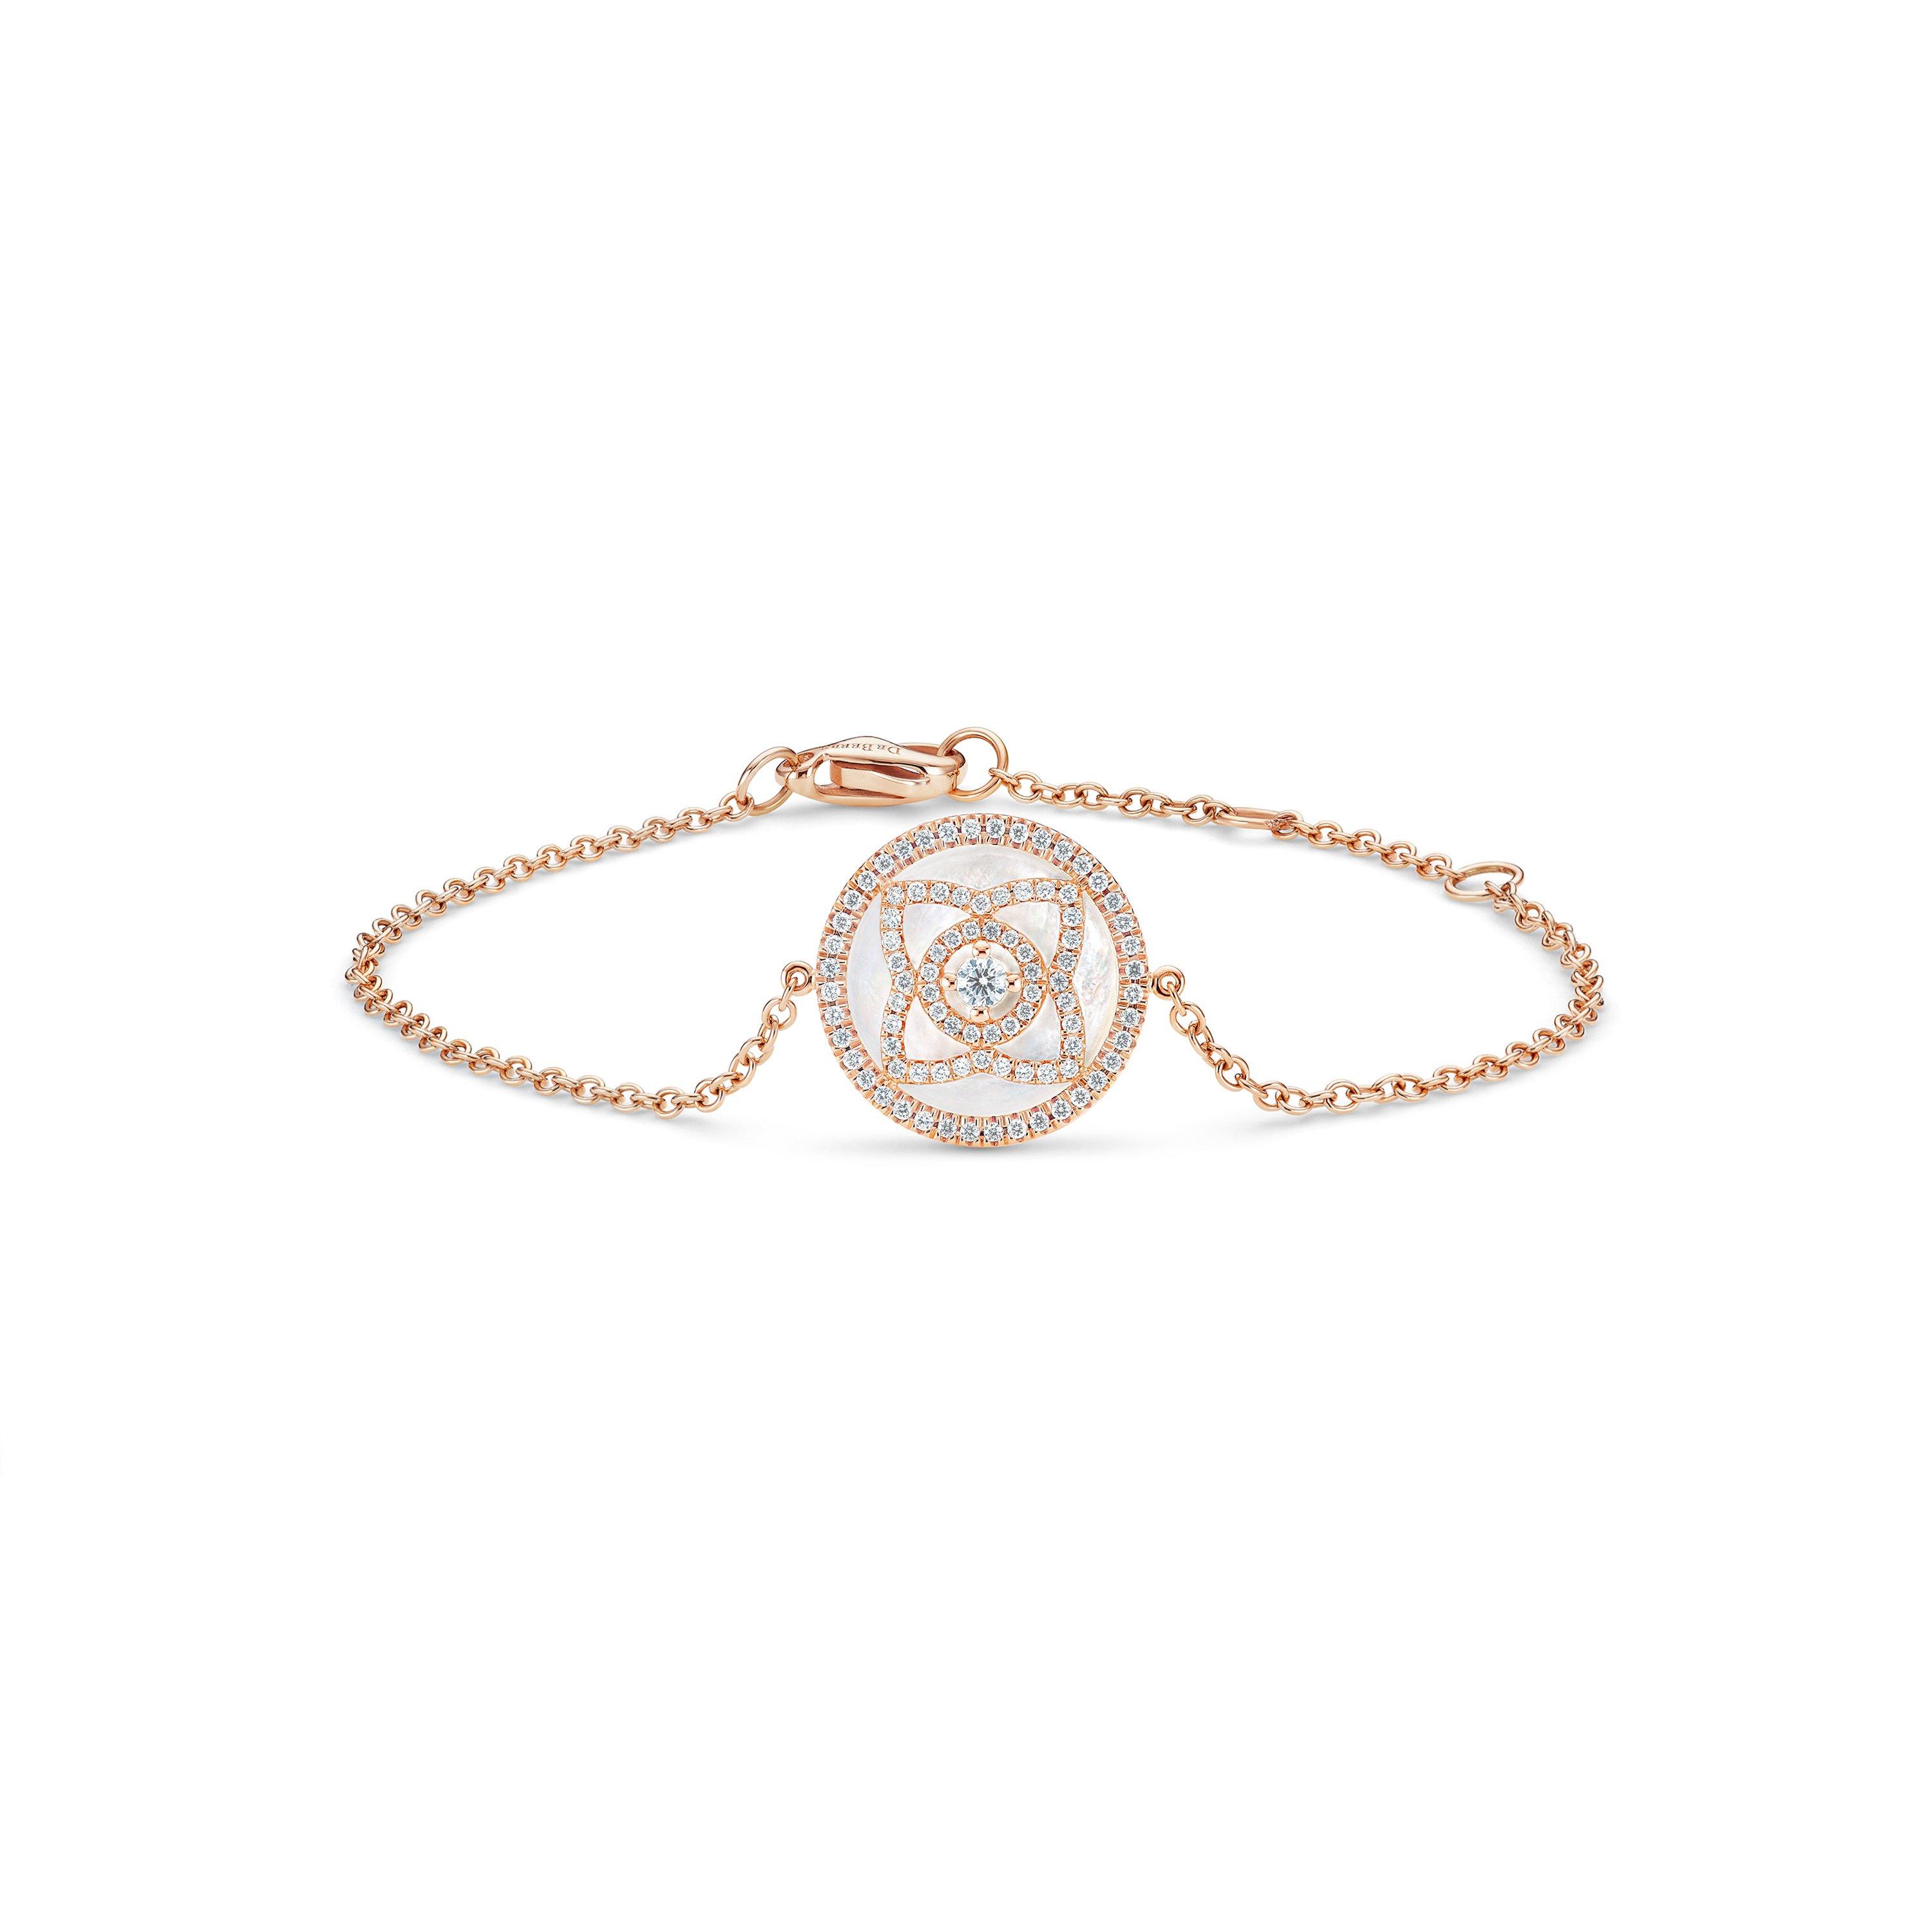 Rose Des Vents Bracelet Yellow Gold, Diamond and Mother-of-Pearl